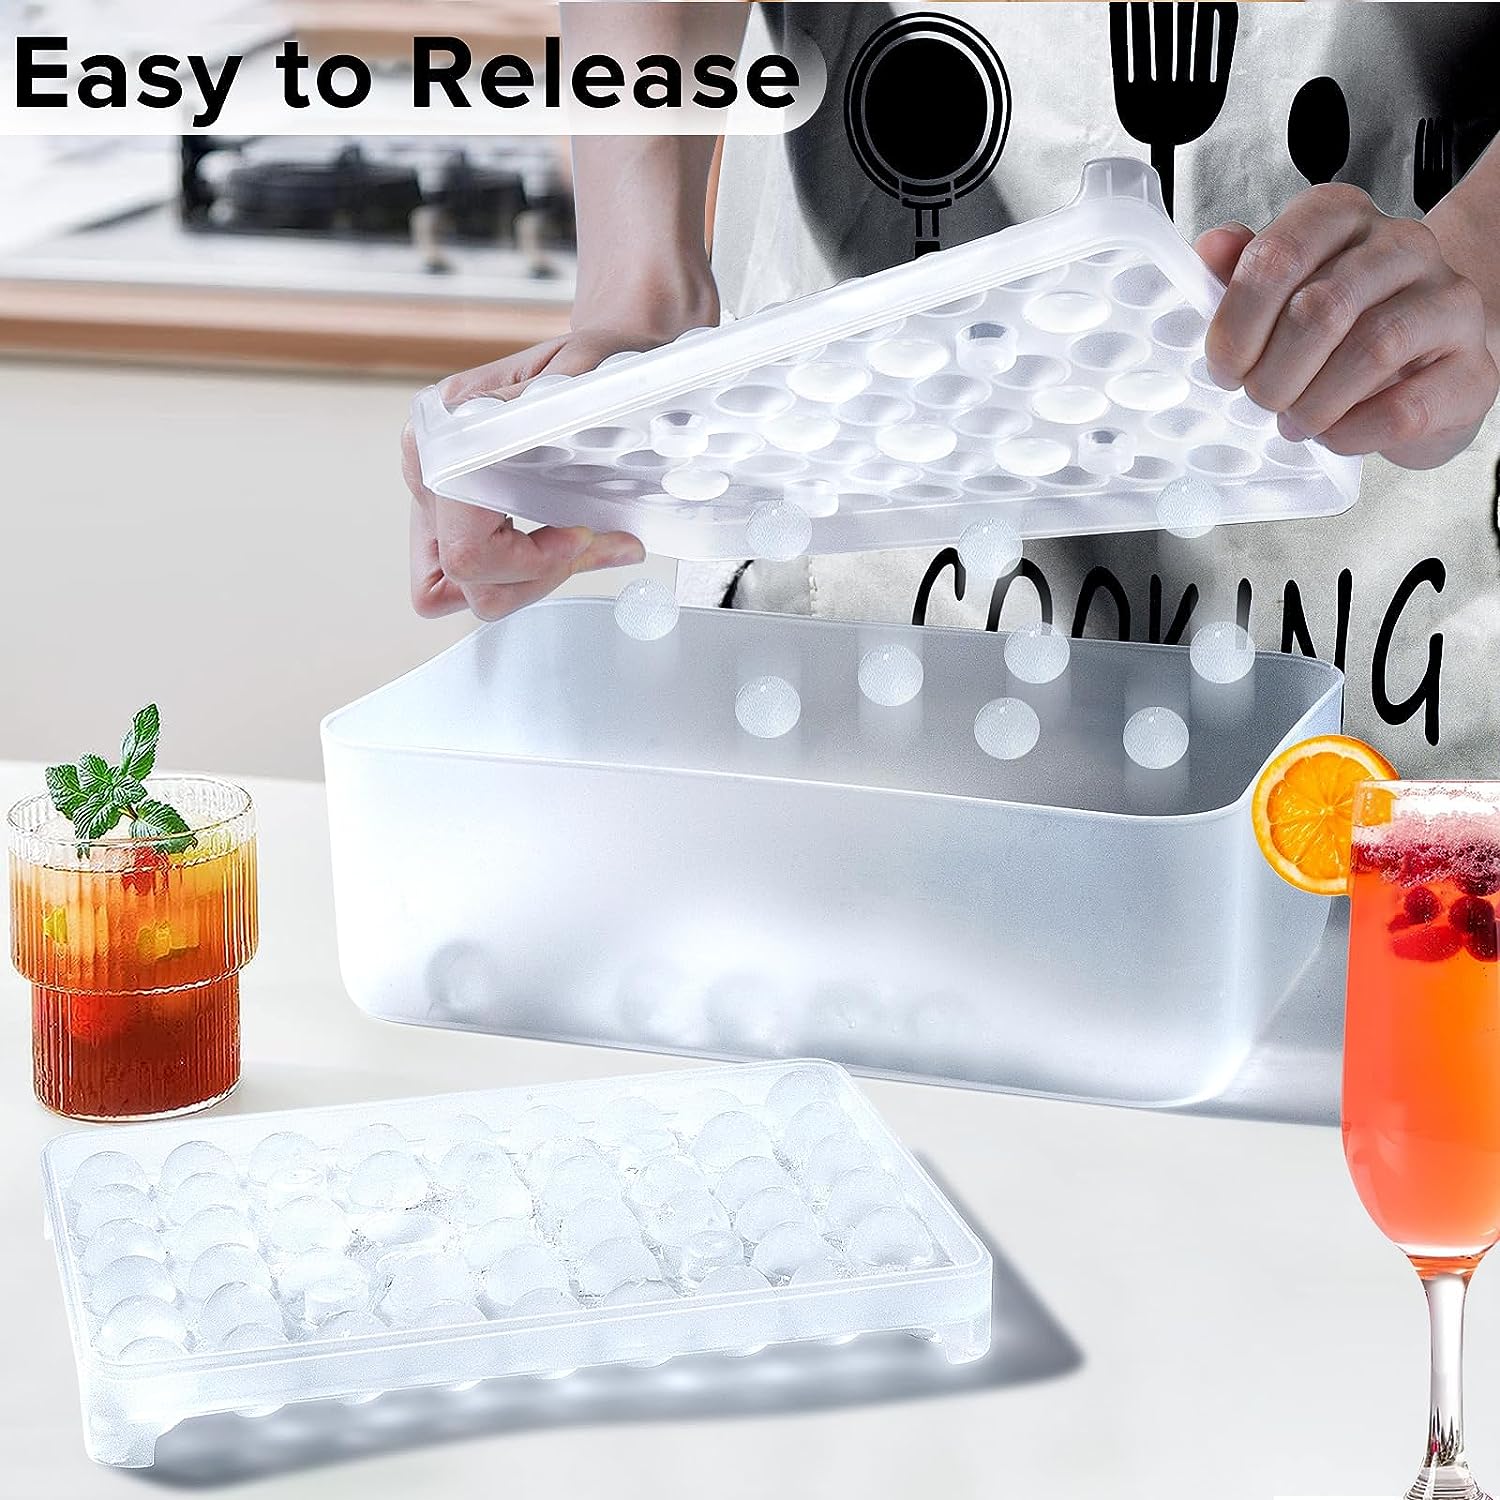 Ice Cube Tray For Freezer With Lid And Bin